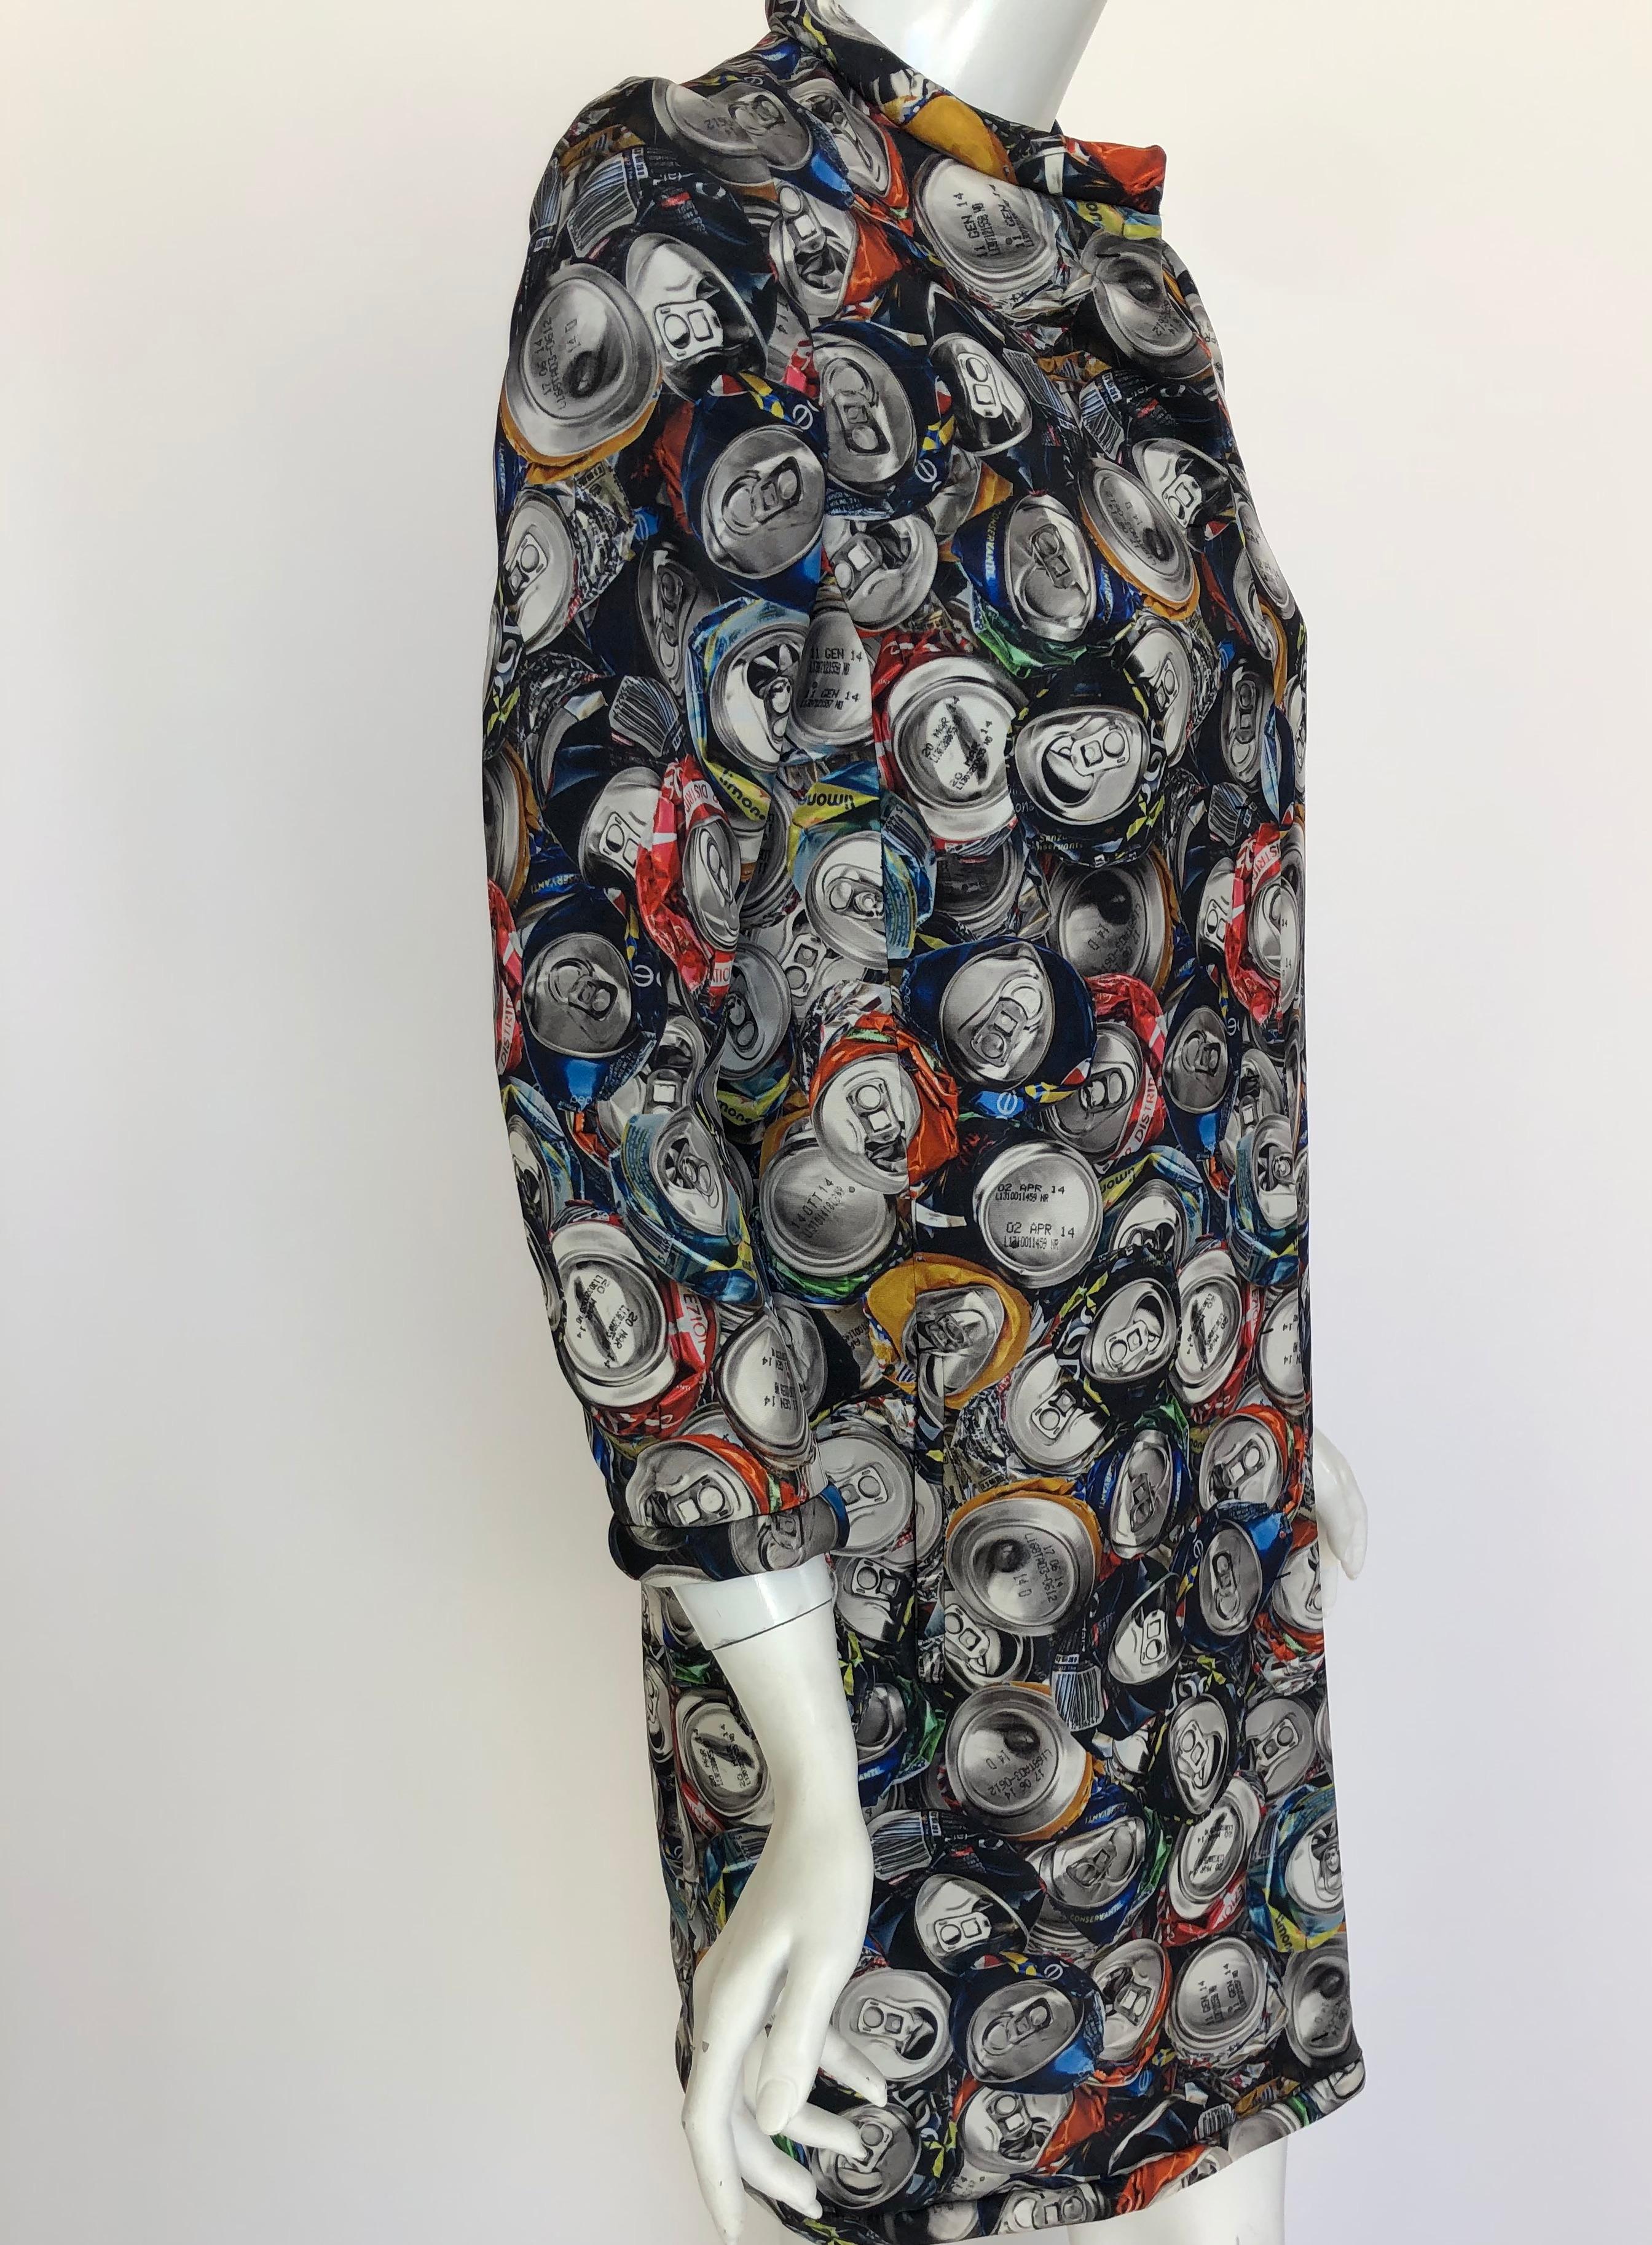 This is a long sleeved rolled collar coat, with hidden snaps, and an all over soda can print pattern. 